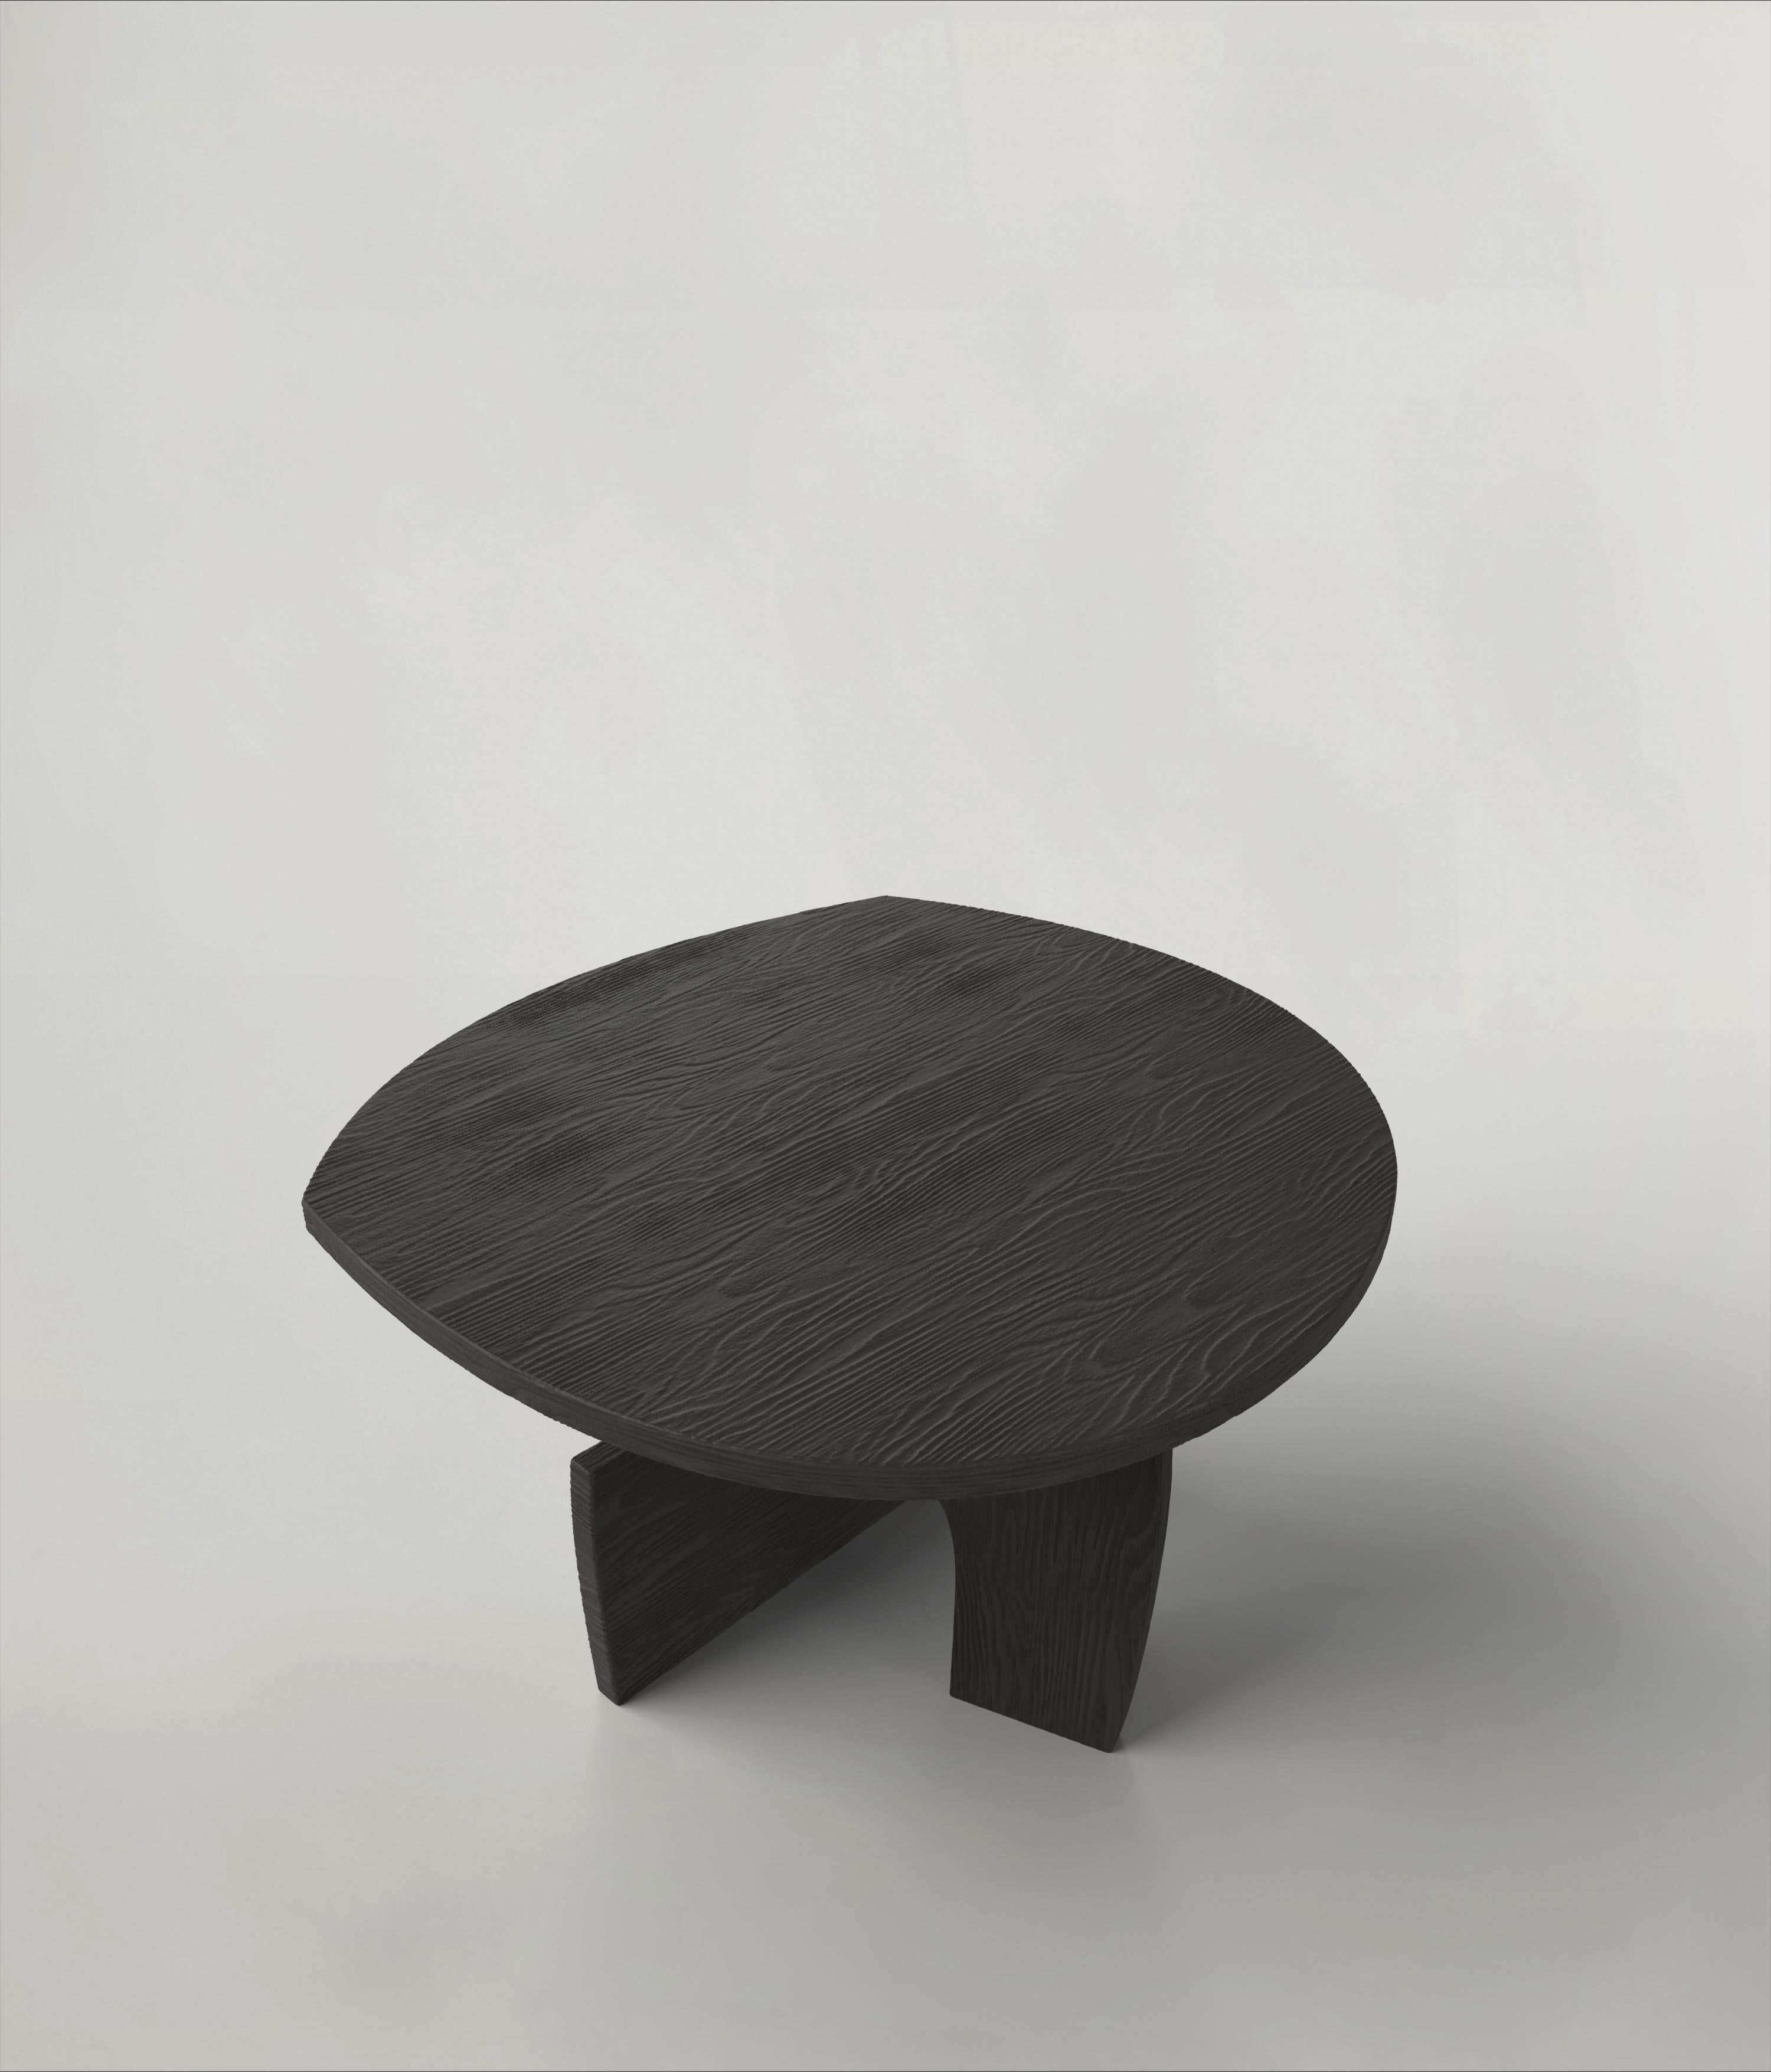 Woodwork Contemporary Limited Edition Signed Charred Table, Reef V2 by Edizione Limitata For Sale